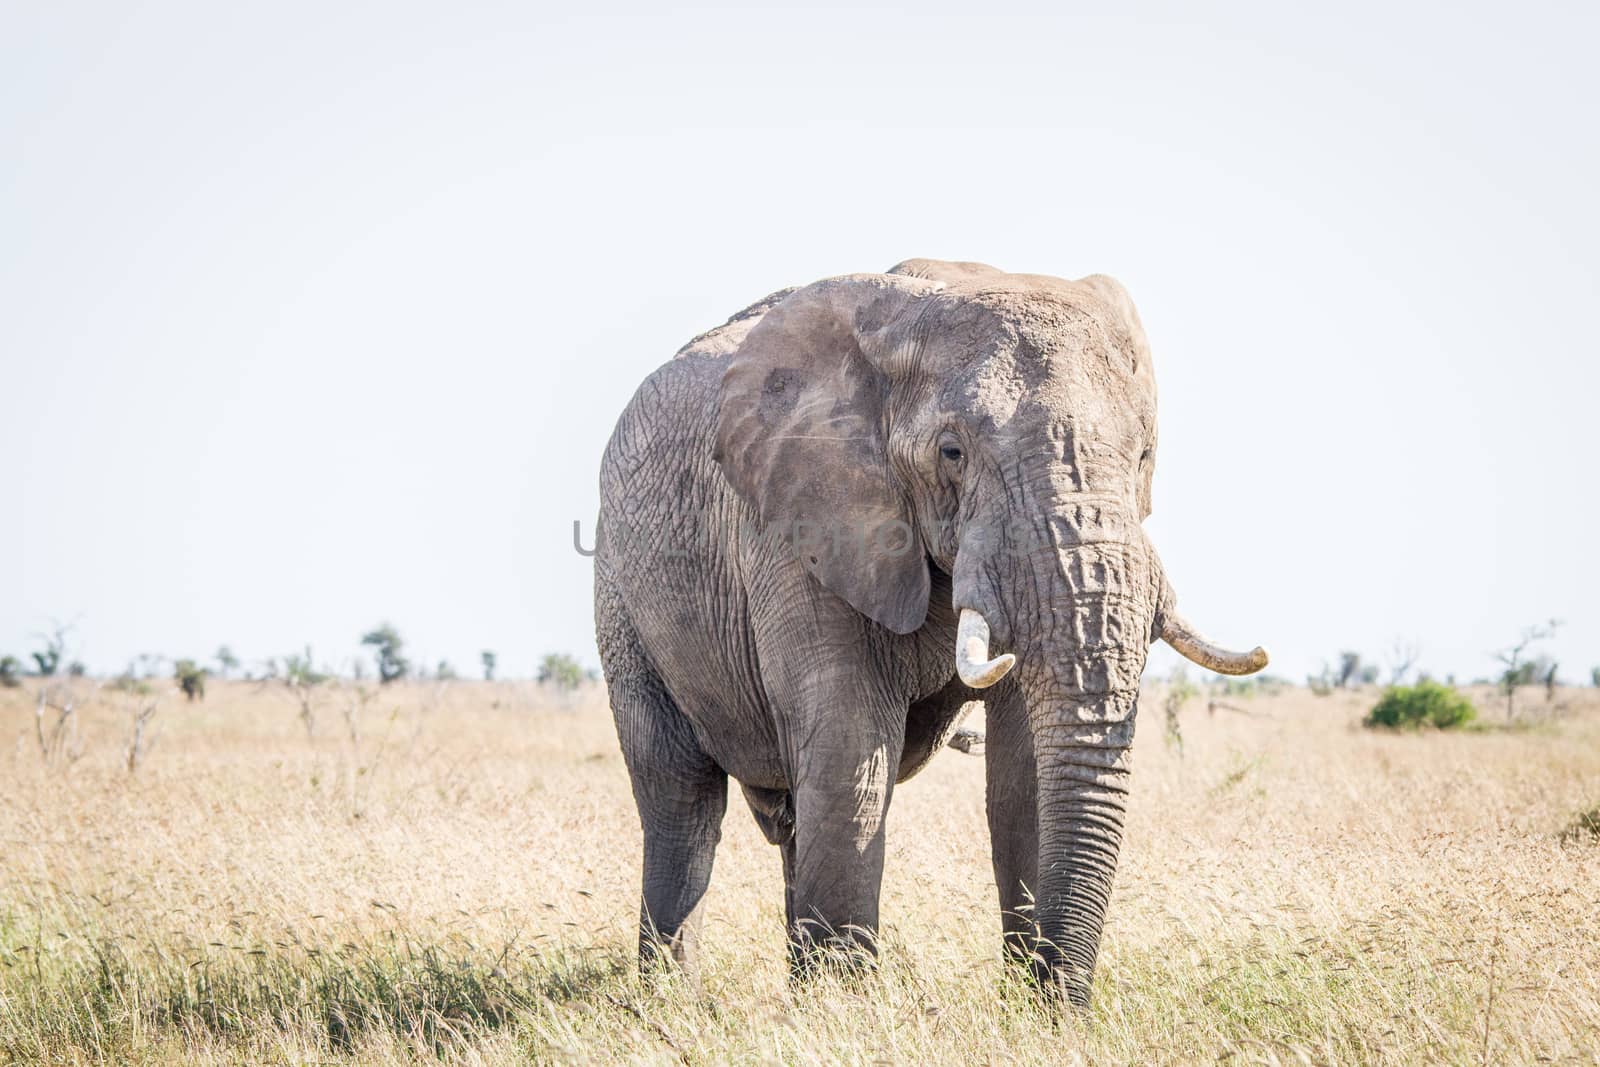 Elephant in the grass in the Kruger National Park. by Simoneemanphotography